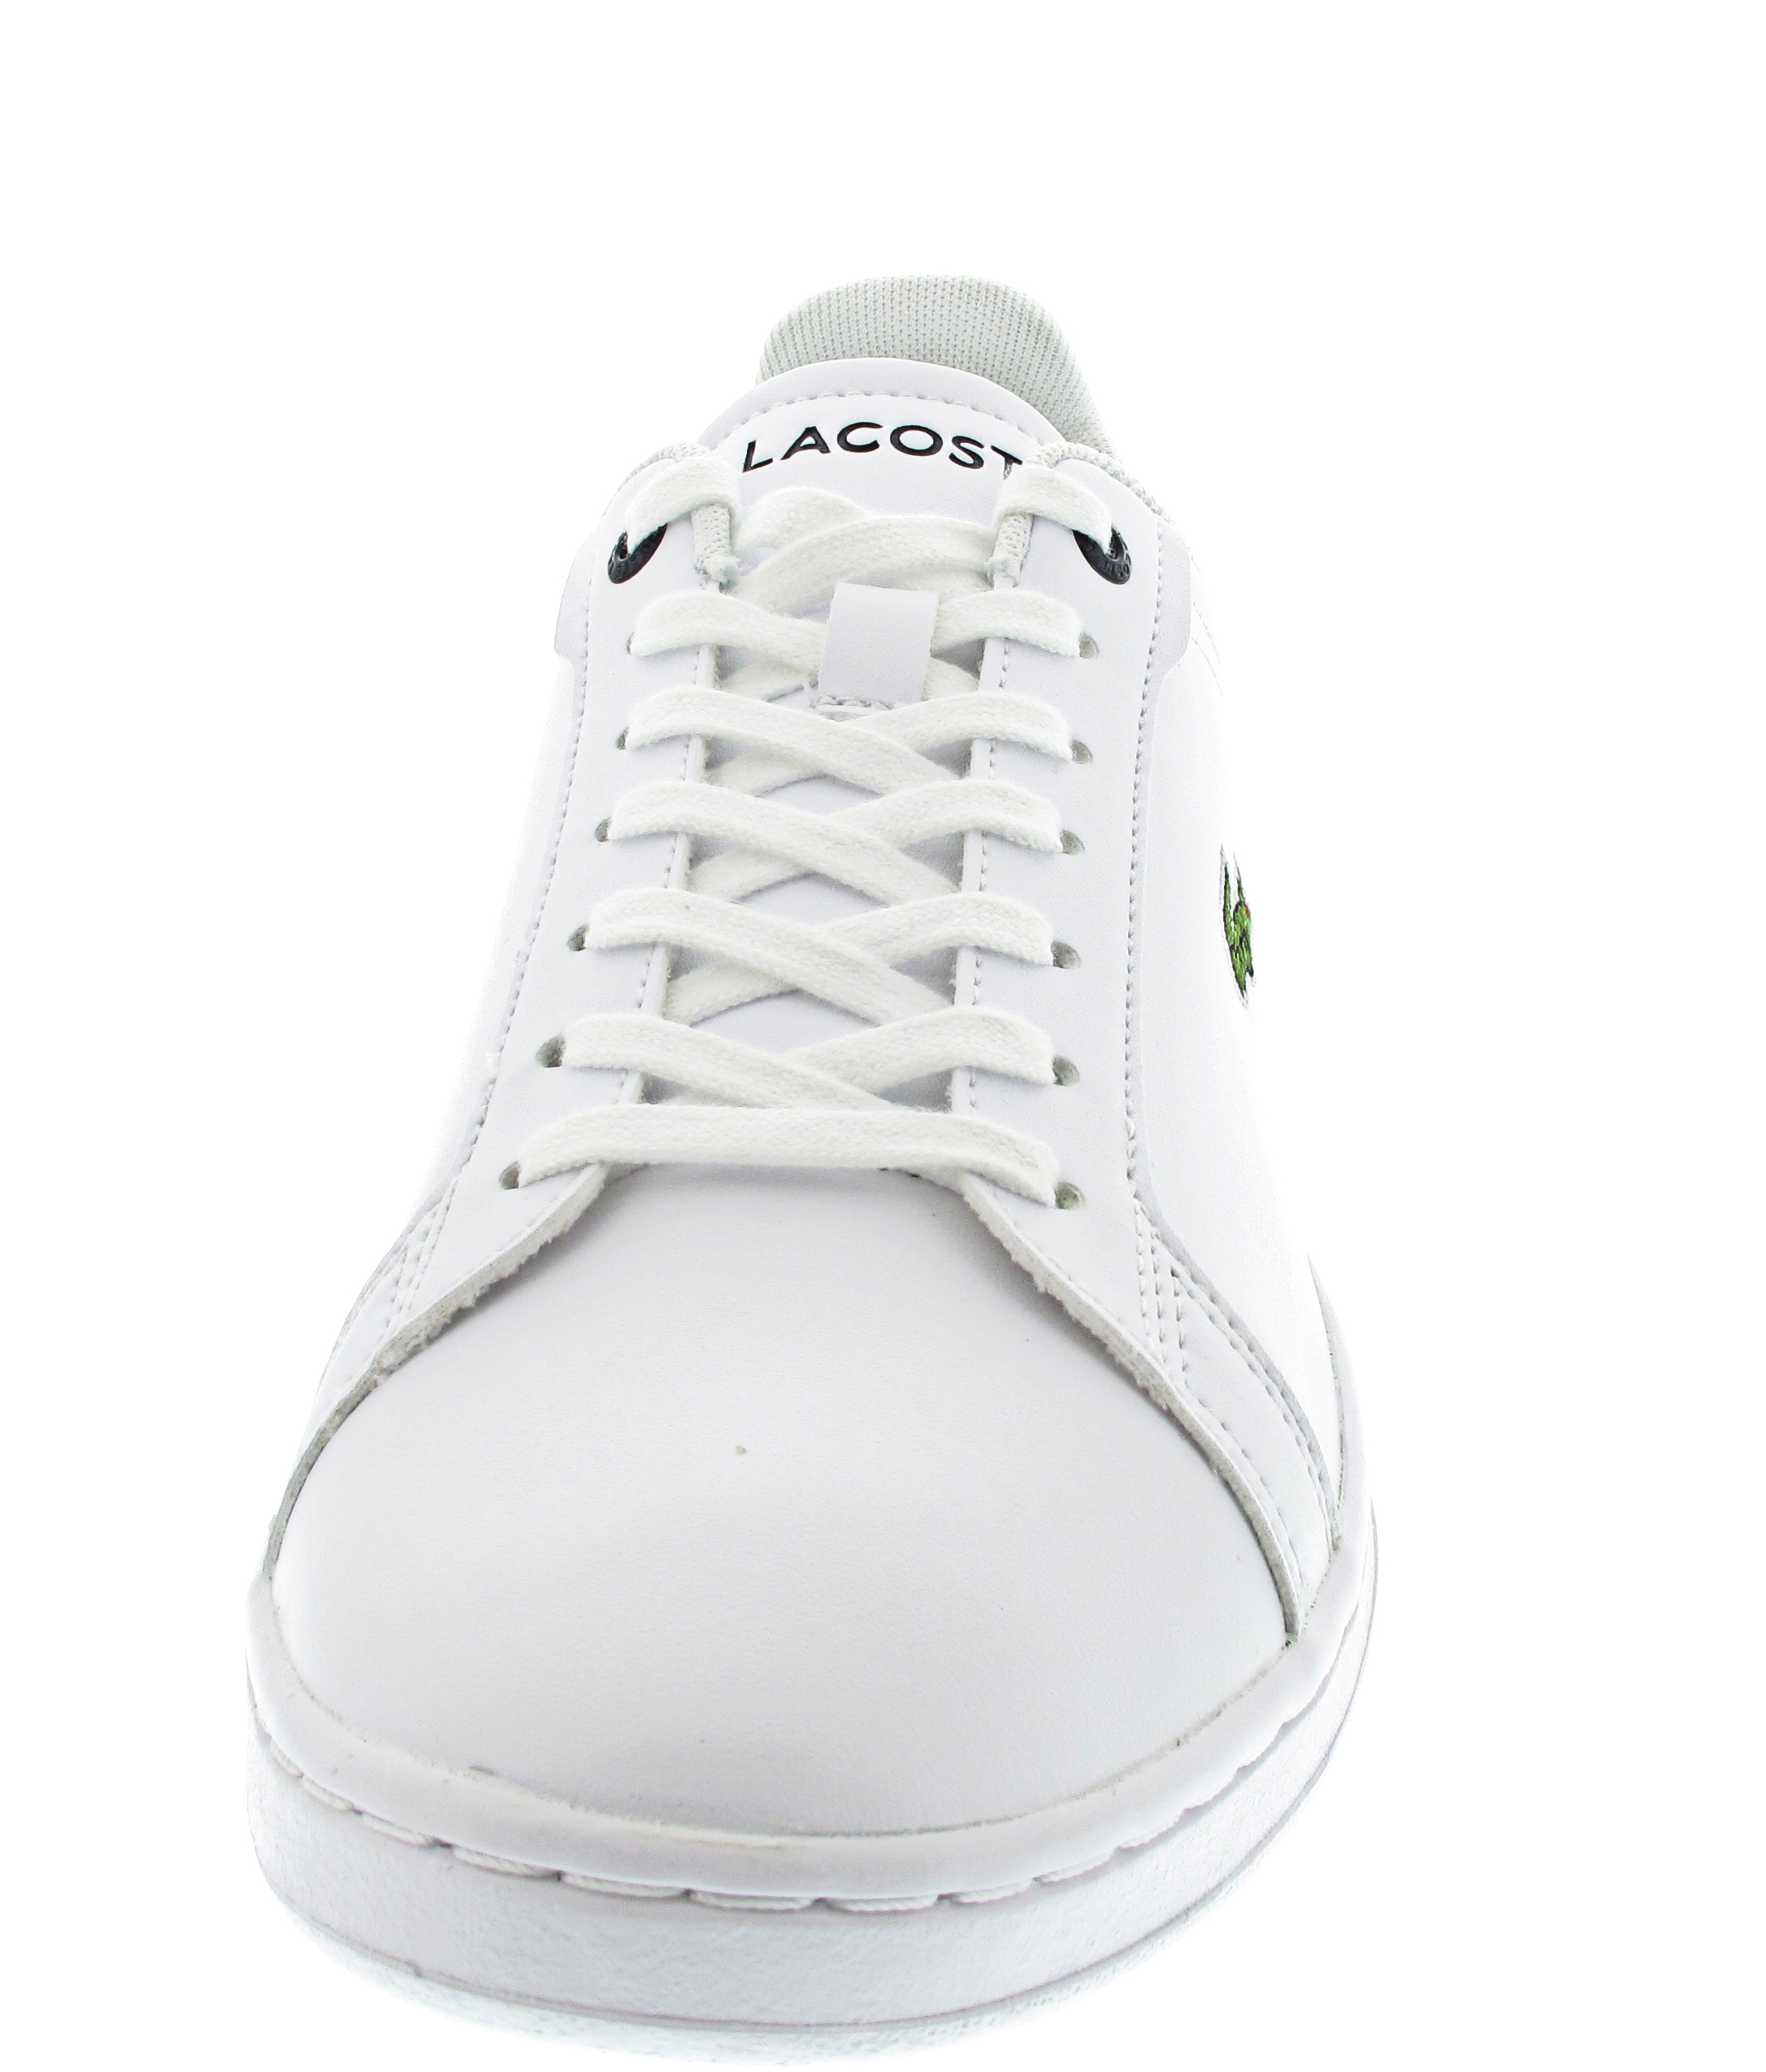 Lacoste Carnaby Pro BL Leather